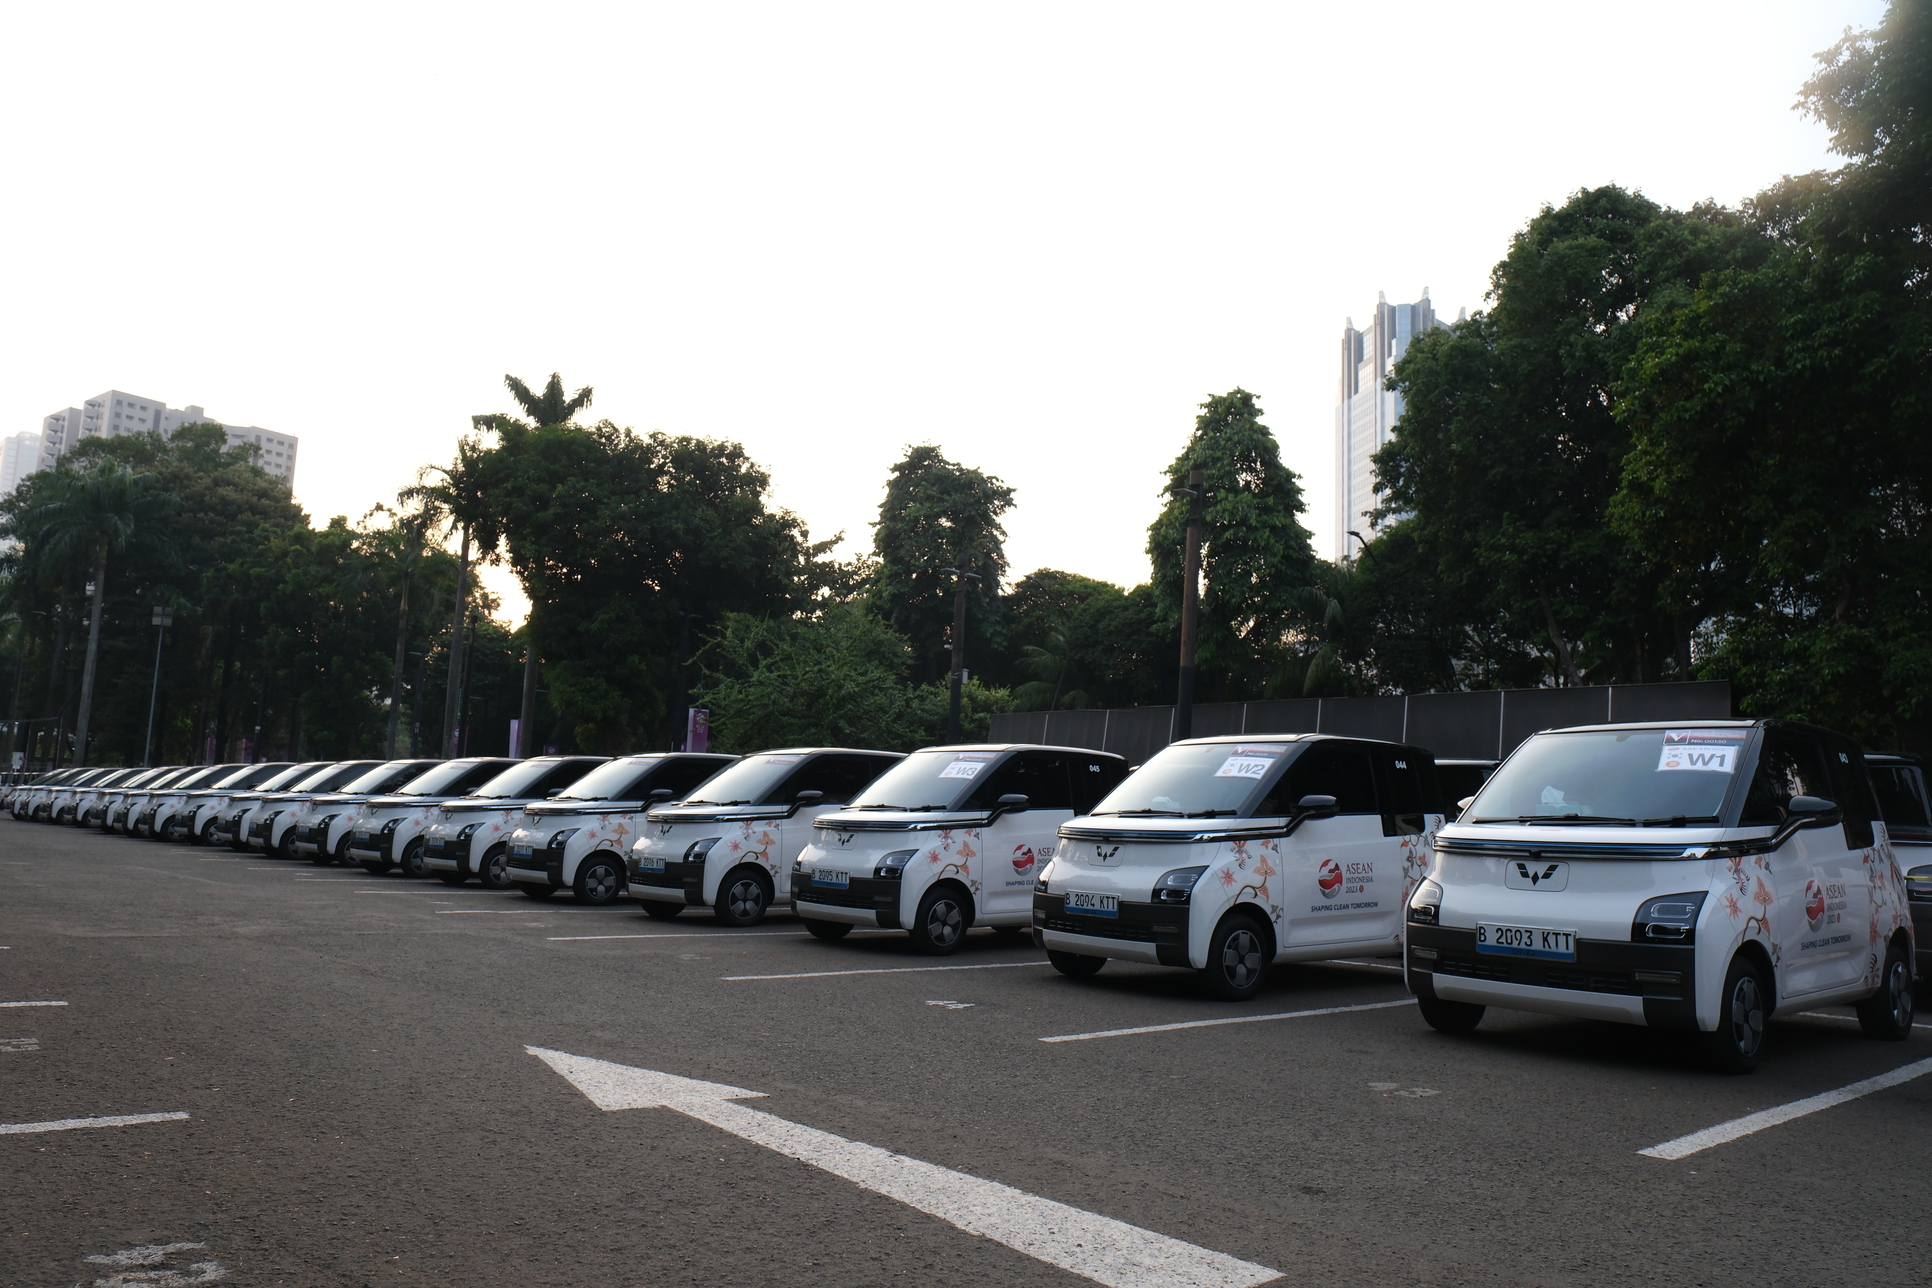 Image 150 Units of Wuling Air ev Take Part in the Success of ASEAN Summit 2023 Jakarta